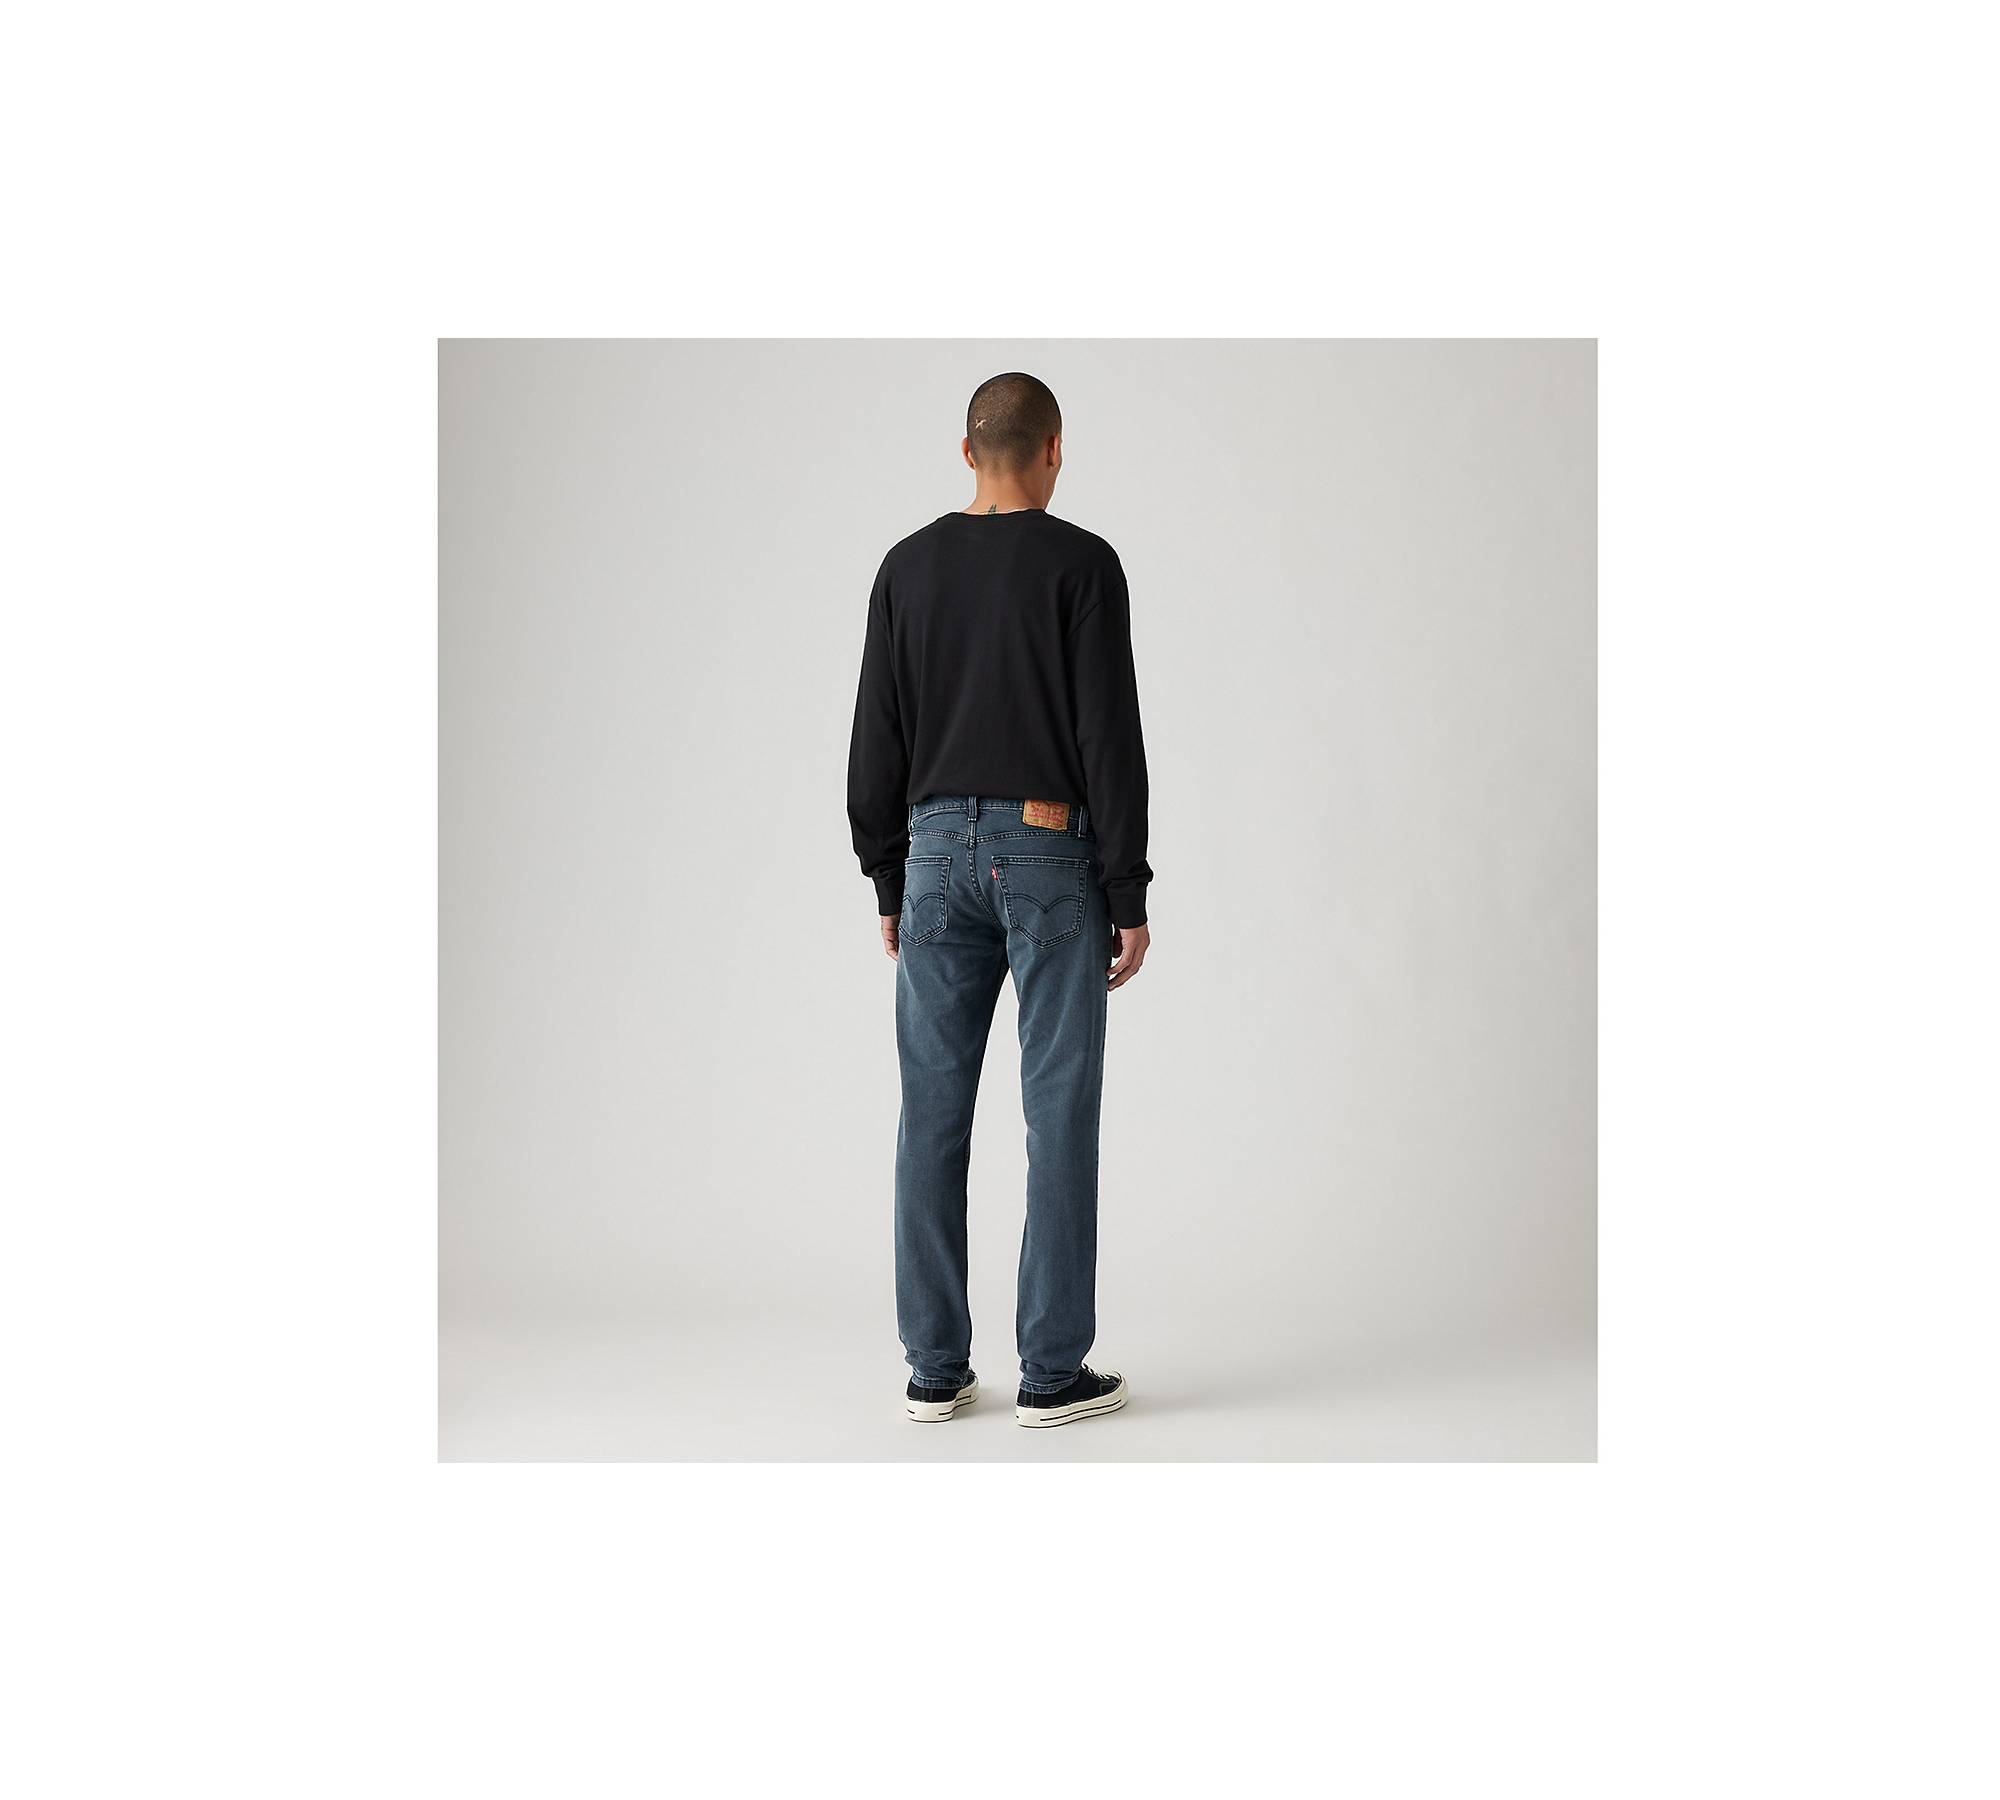 Signature by Levi Strauss & Co.™ Men's Bootcut Jeans, Available sizes: 29 –  38